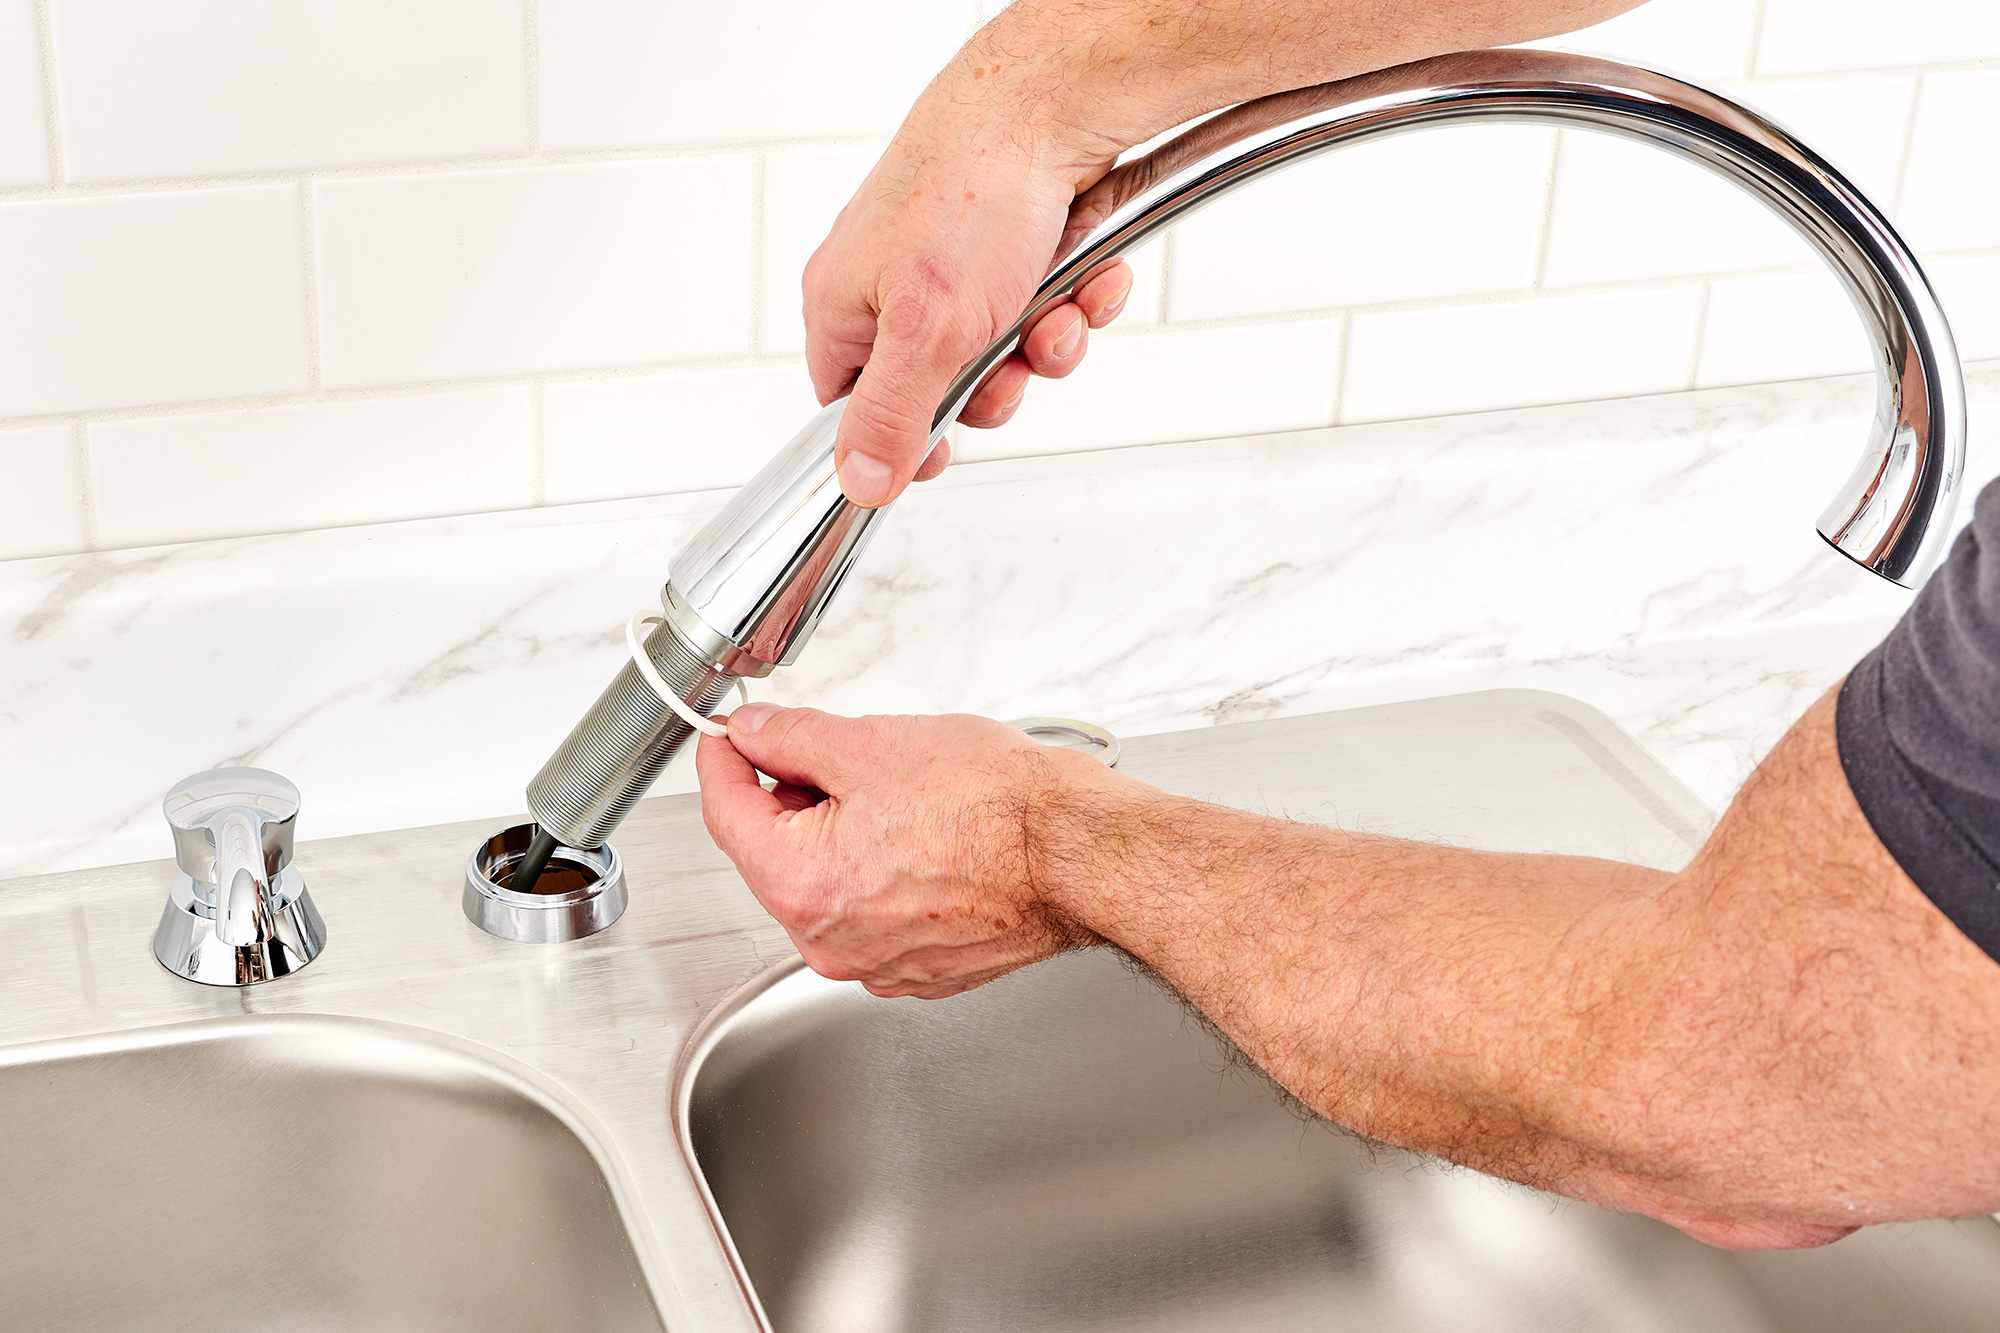 How To Install A Delta Faucet